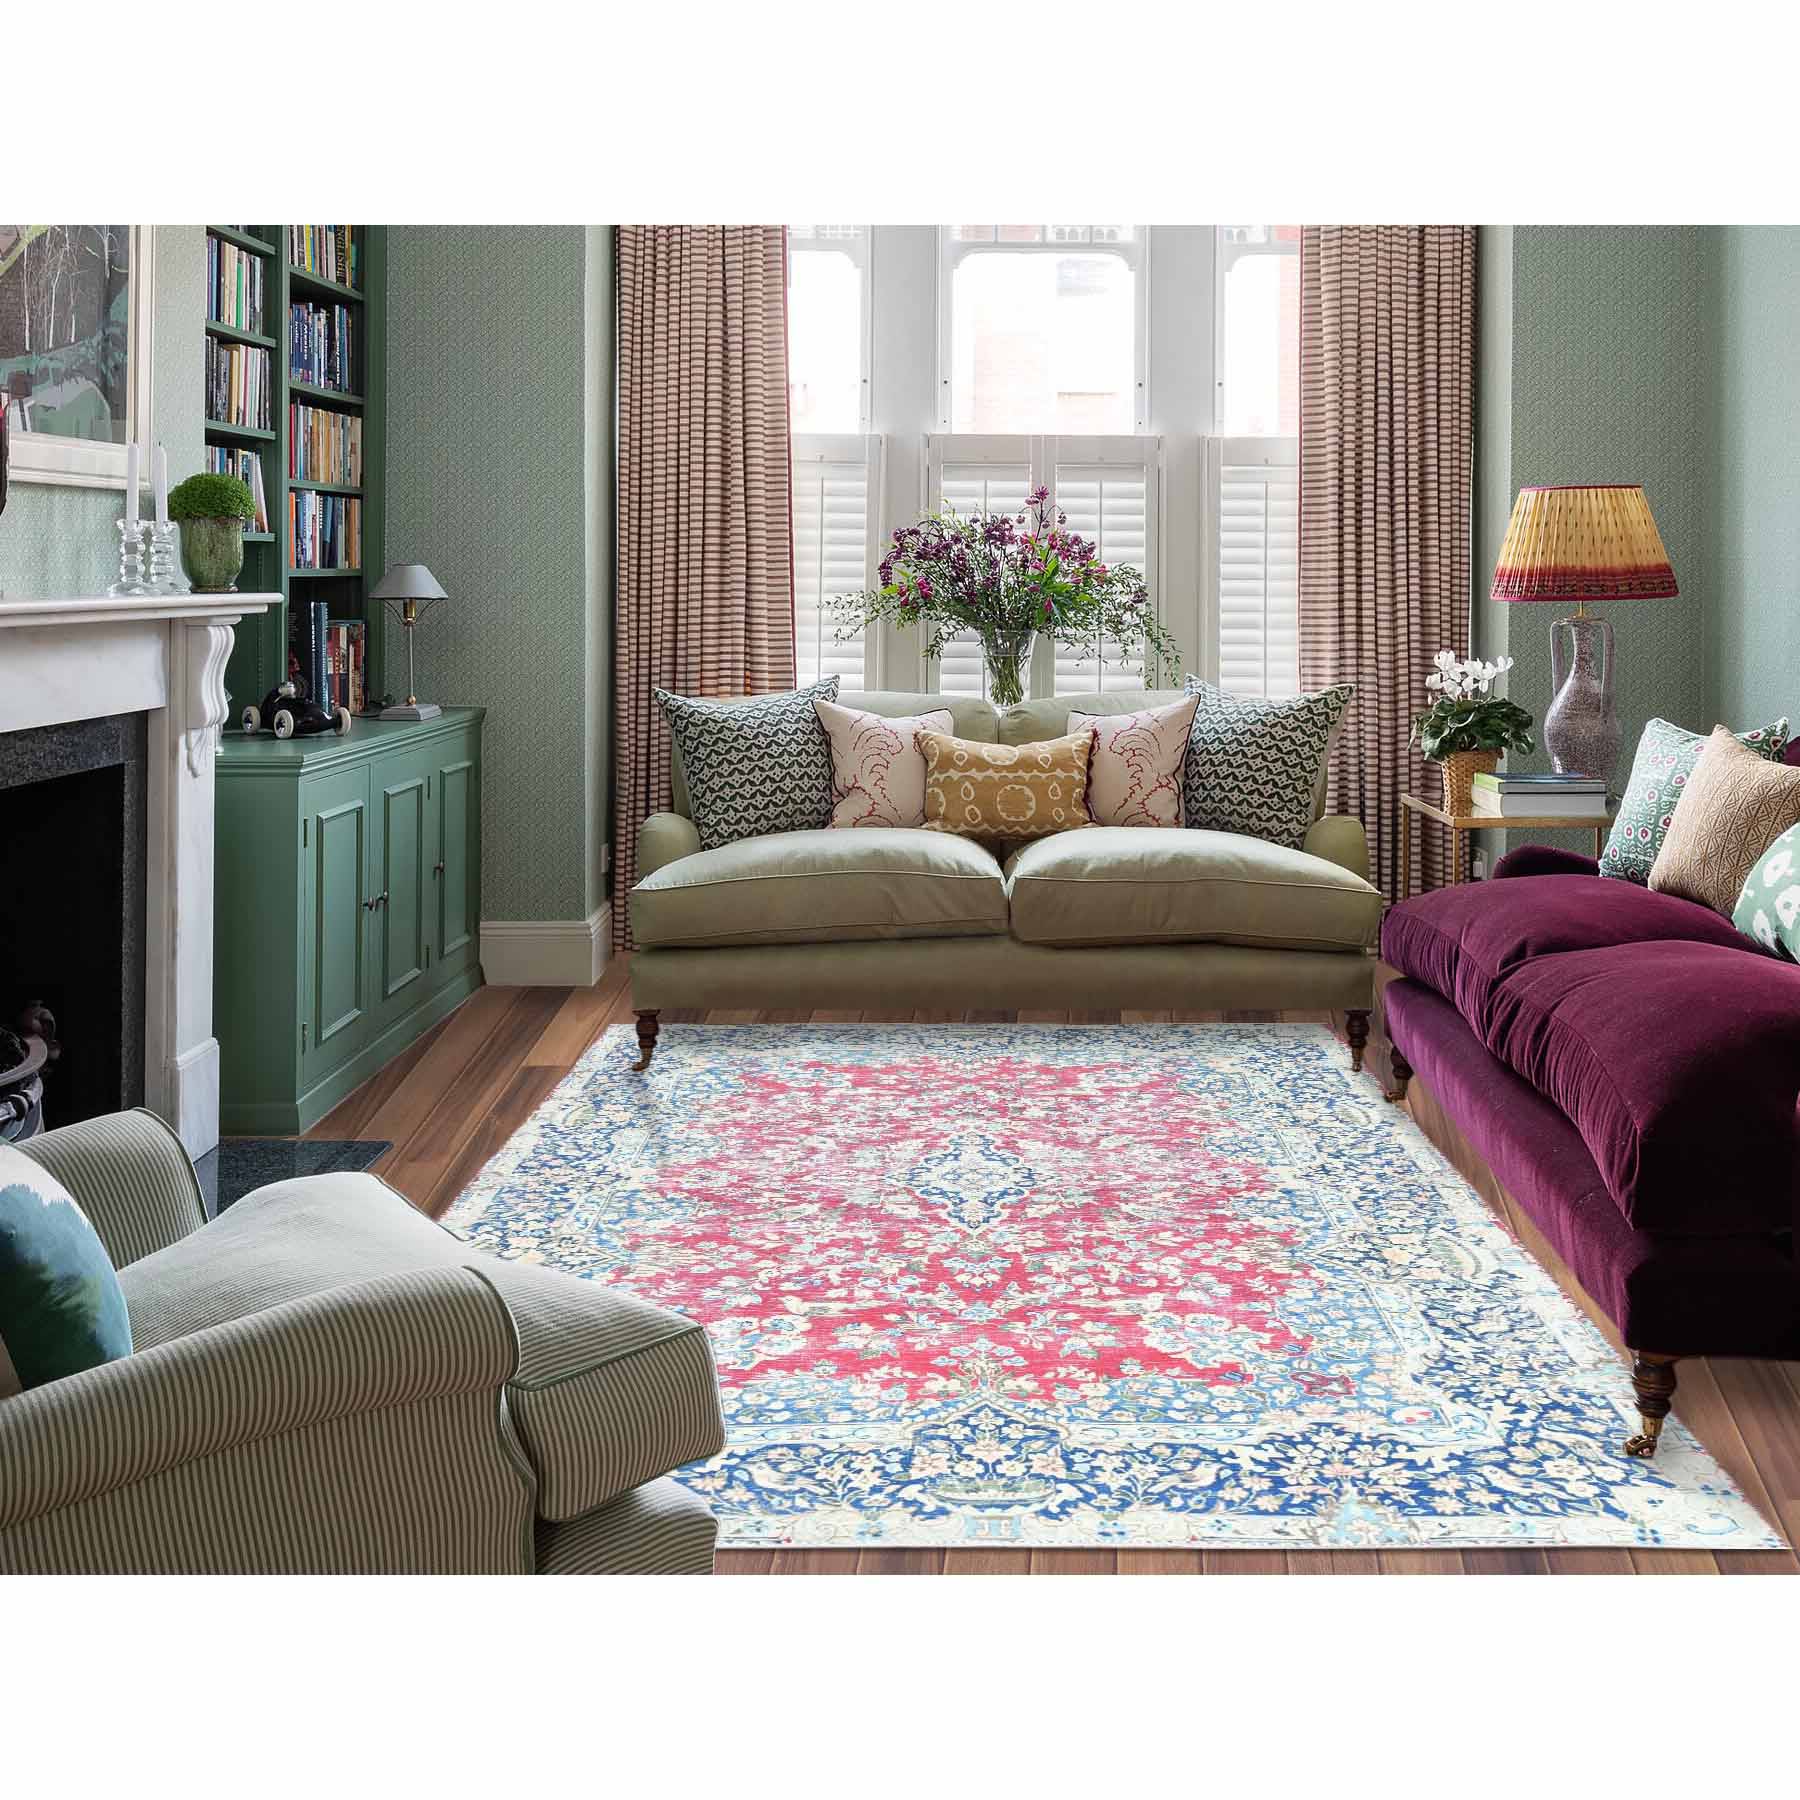 Overdyed-Vintage-Hand-Knotted-Rug-308990